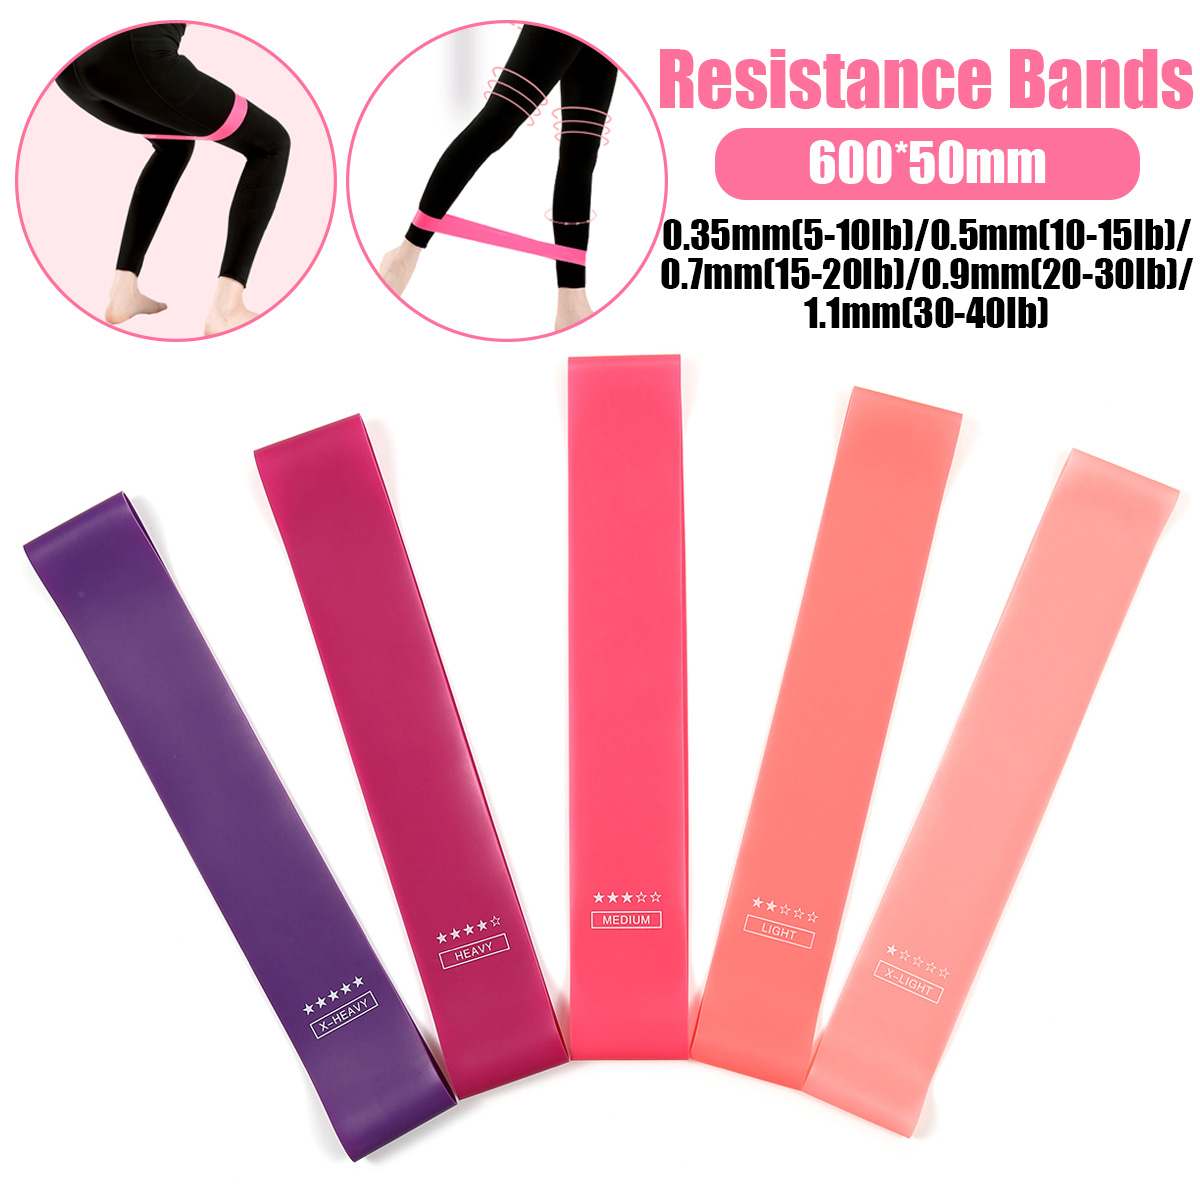 15pcs-Latex-Resistance-Bands-Strength-Training-Exercise-Fitness-Home-Yoga-60050mm-1678687-3